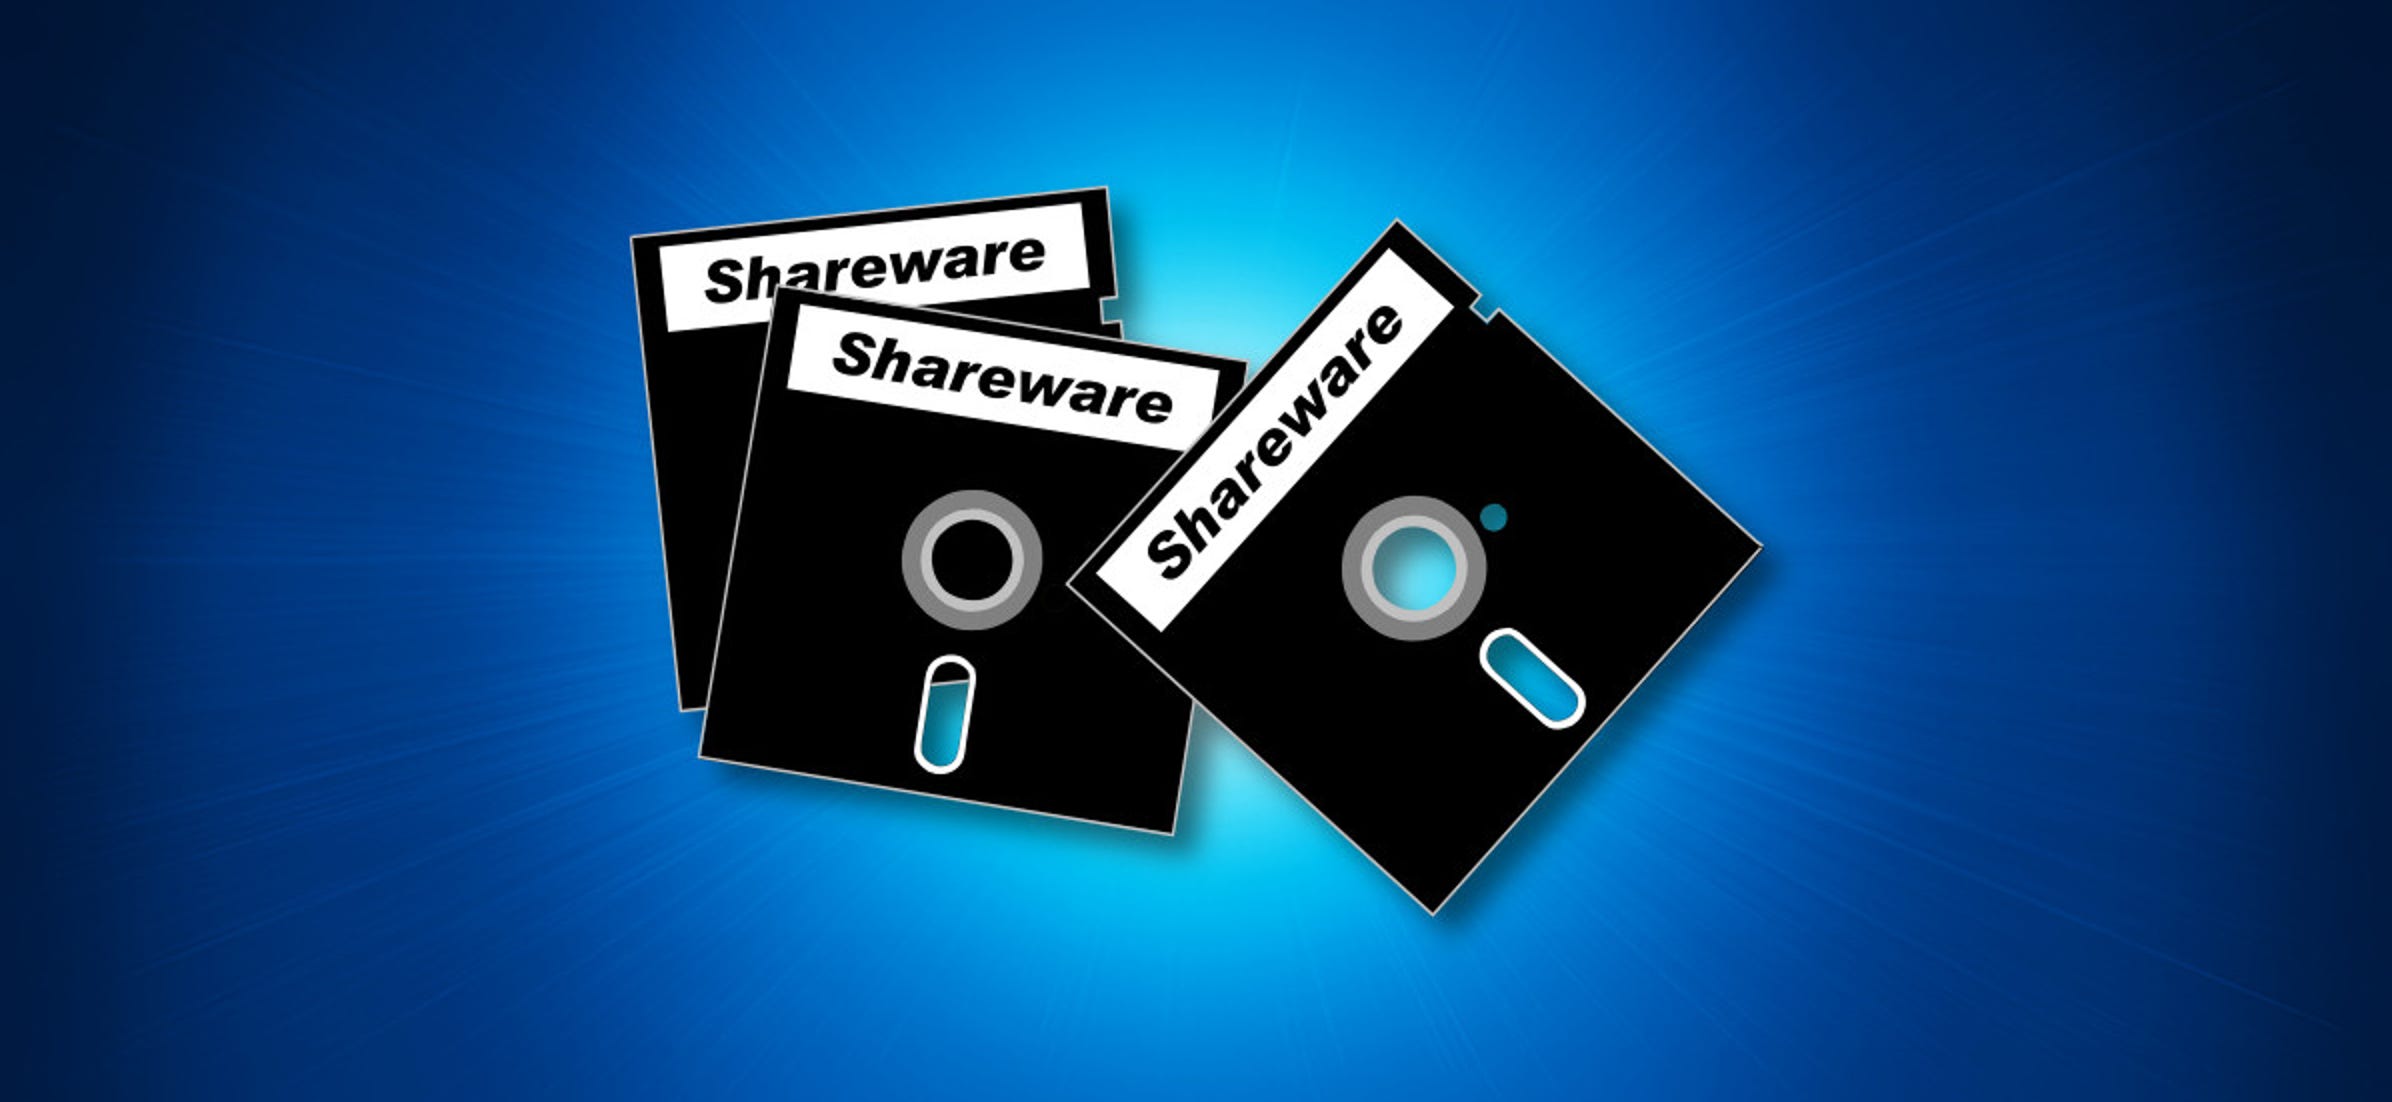 What Is Shareware, and Why Was It So Popular in the 1990s?